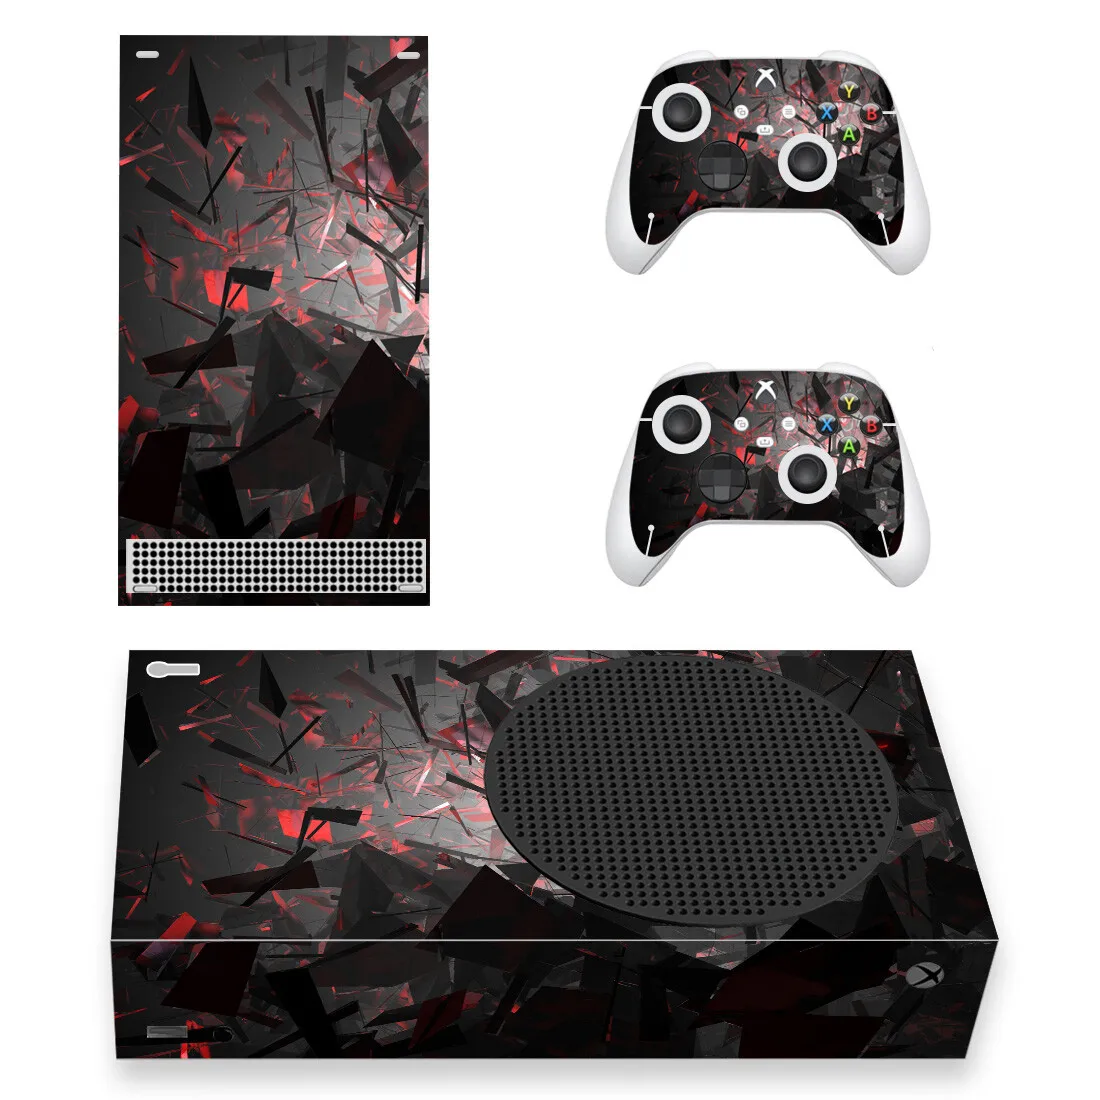 Custom Design Skin Sticker Decal Cover for Xbox Series S Console and 2 Controllers Xbox Series Slim Skin Sticker Vinyl